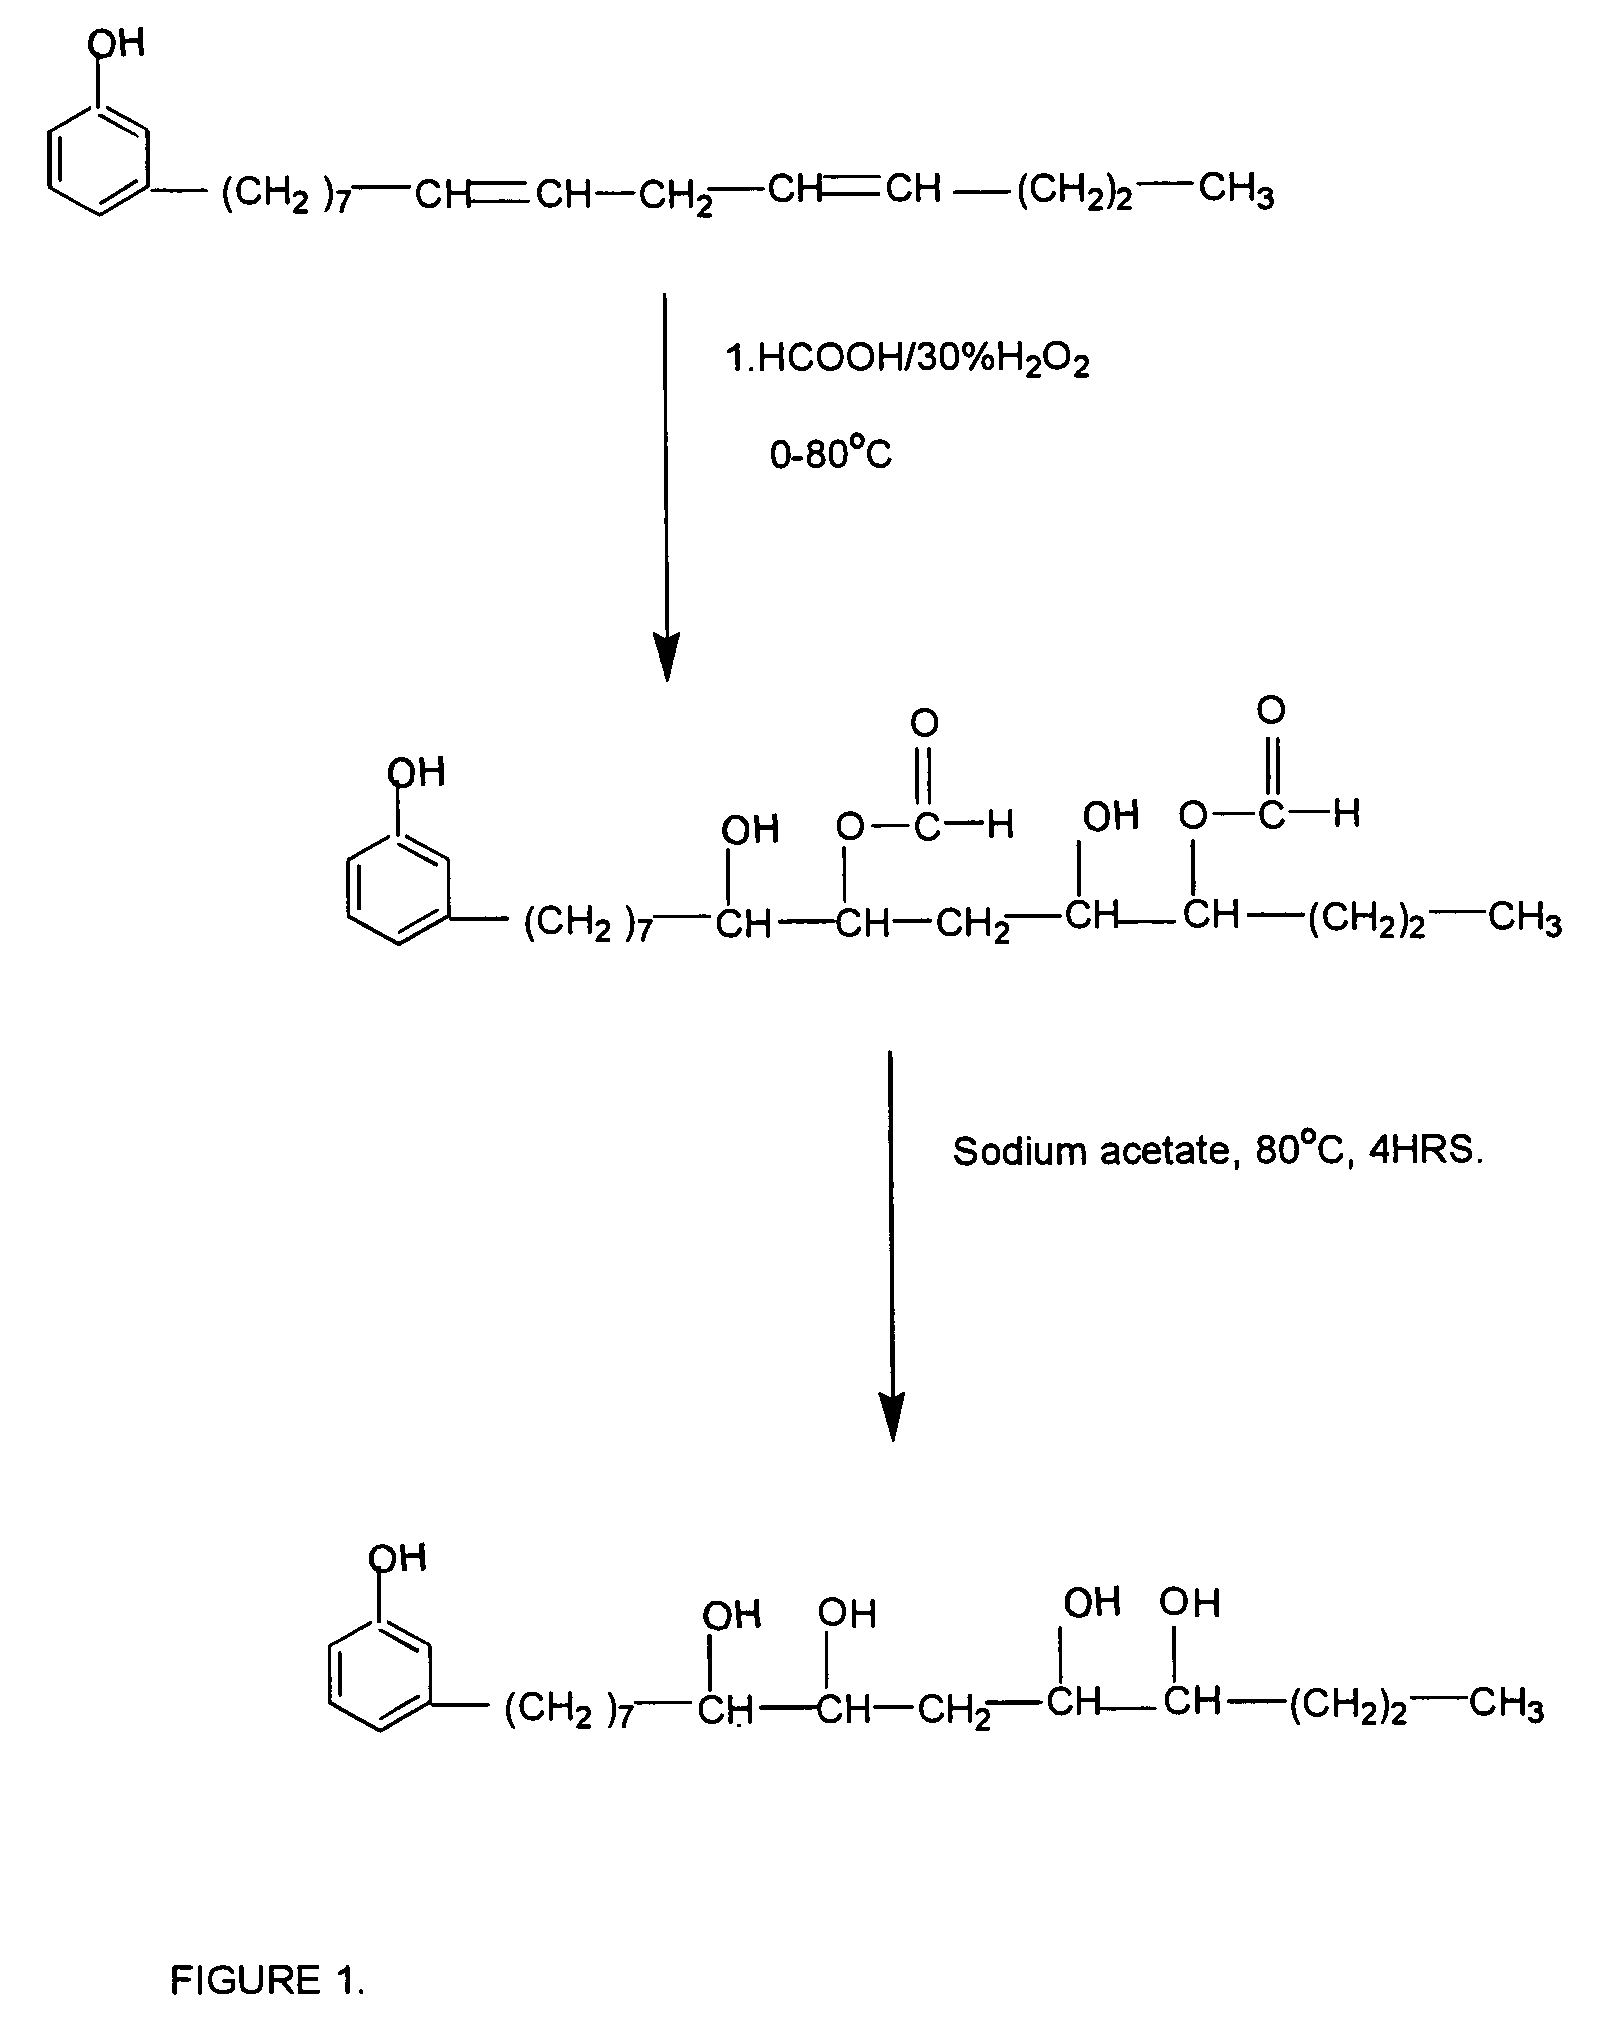 Process for preparing polyurethane polyol and rigid foams therefrom